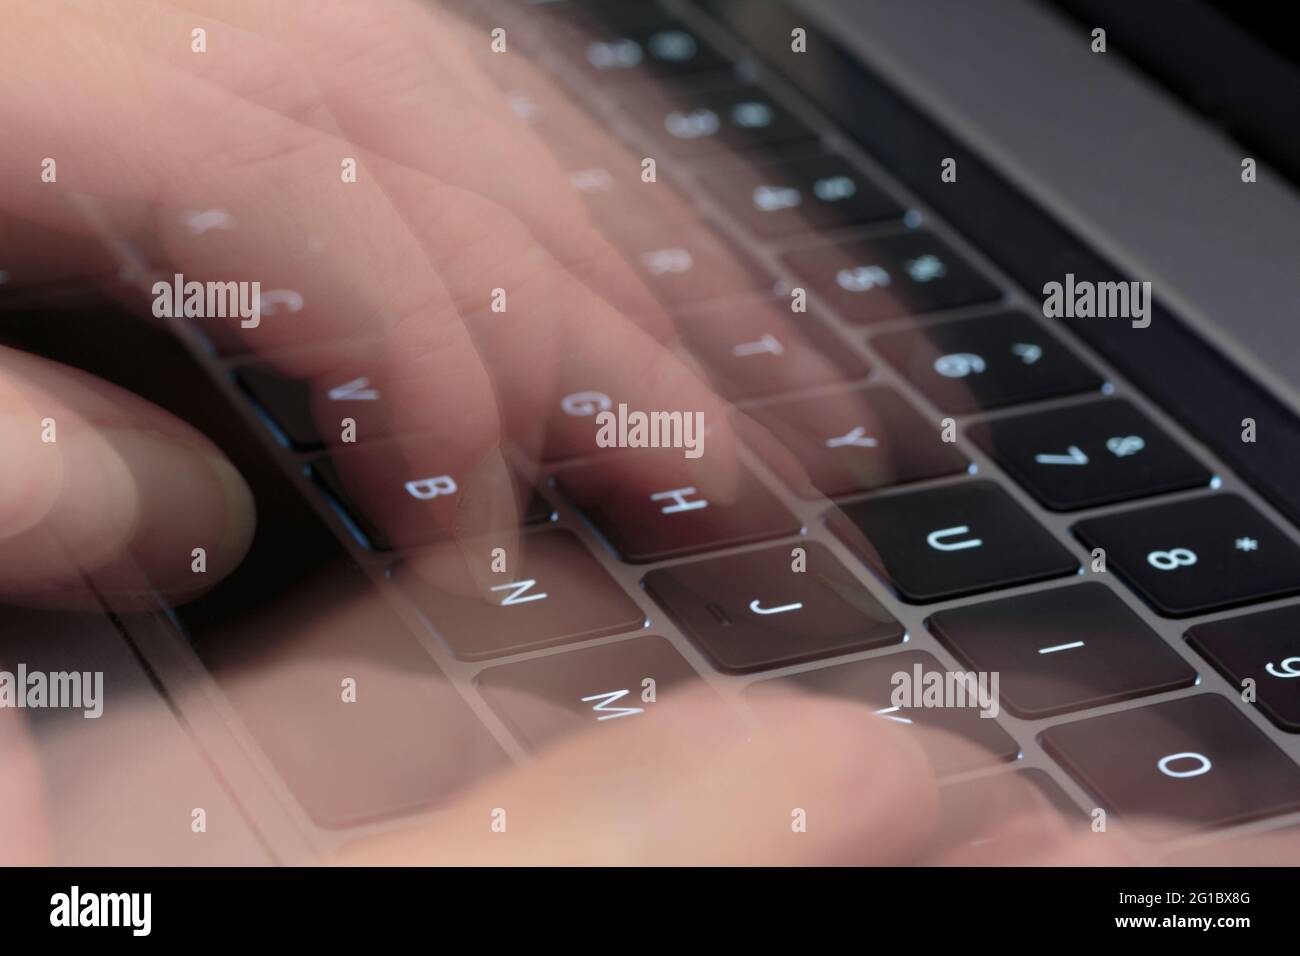 fingers typing on a computer keyboard using a long exposure ghosting technique to simulate motion in photography Stock Photo